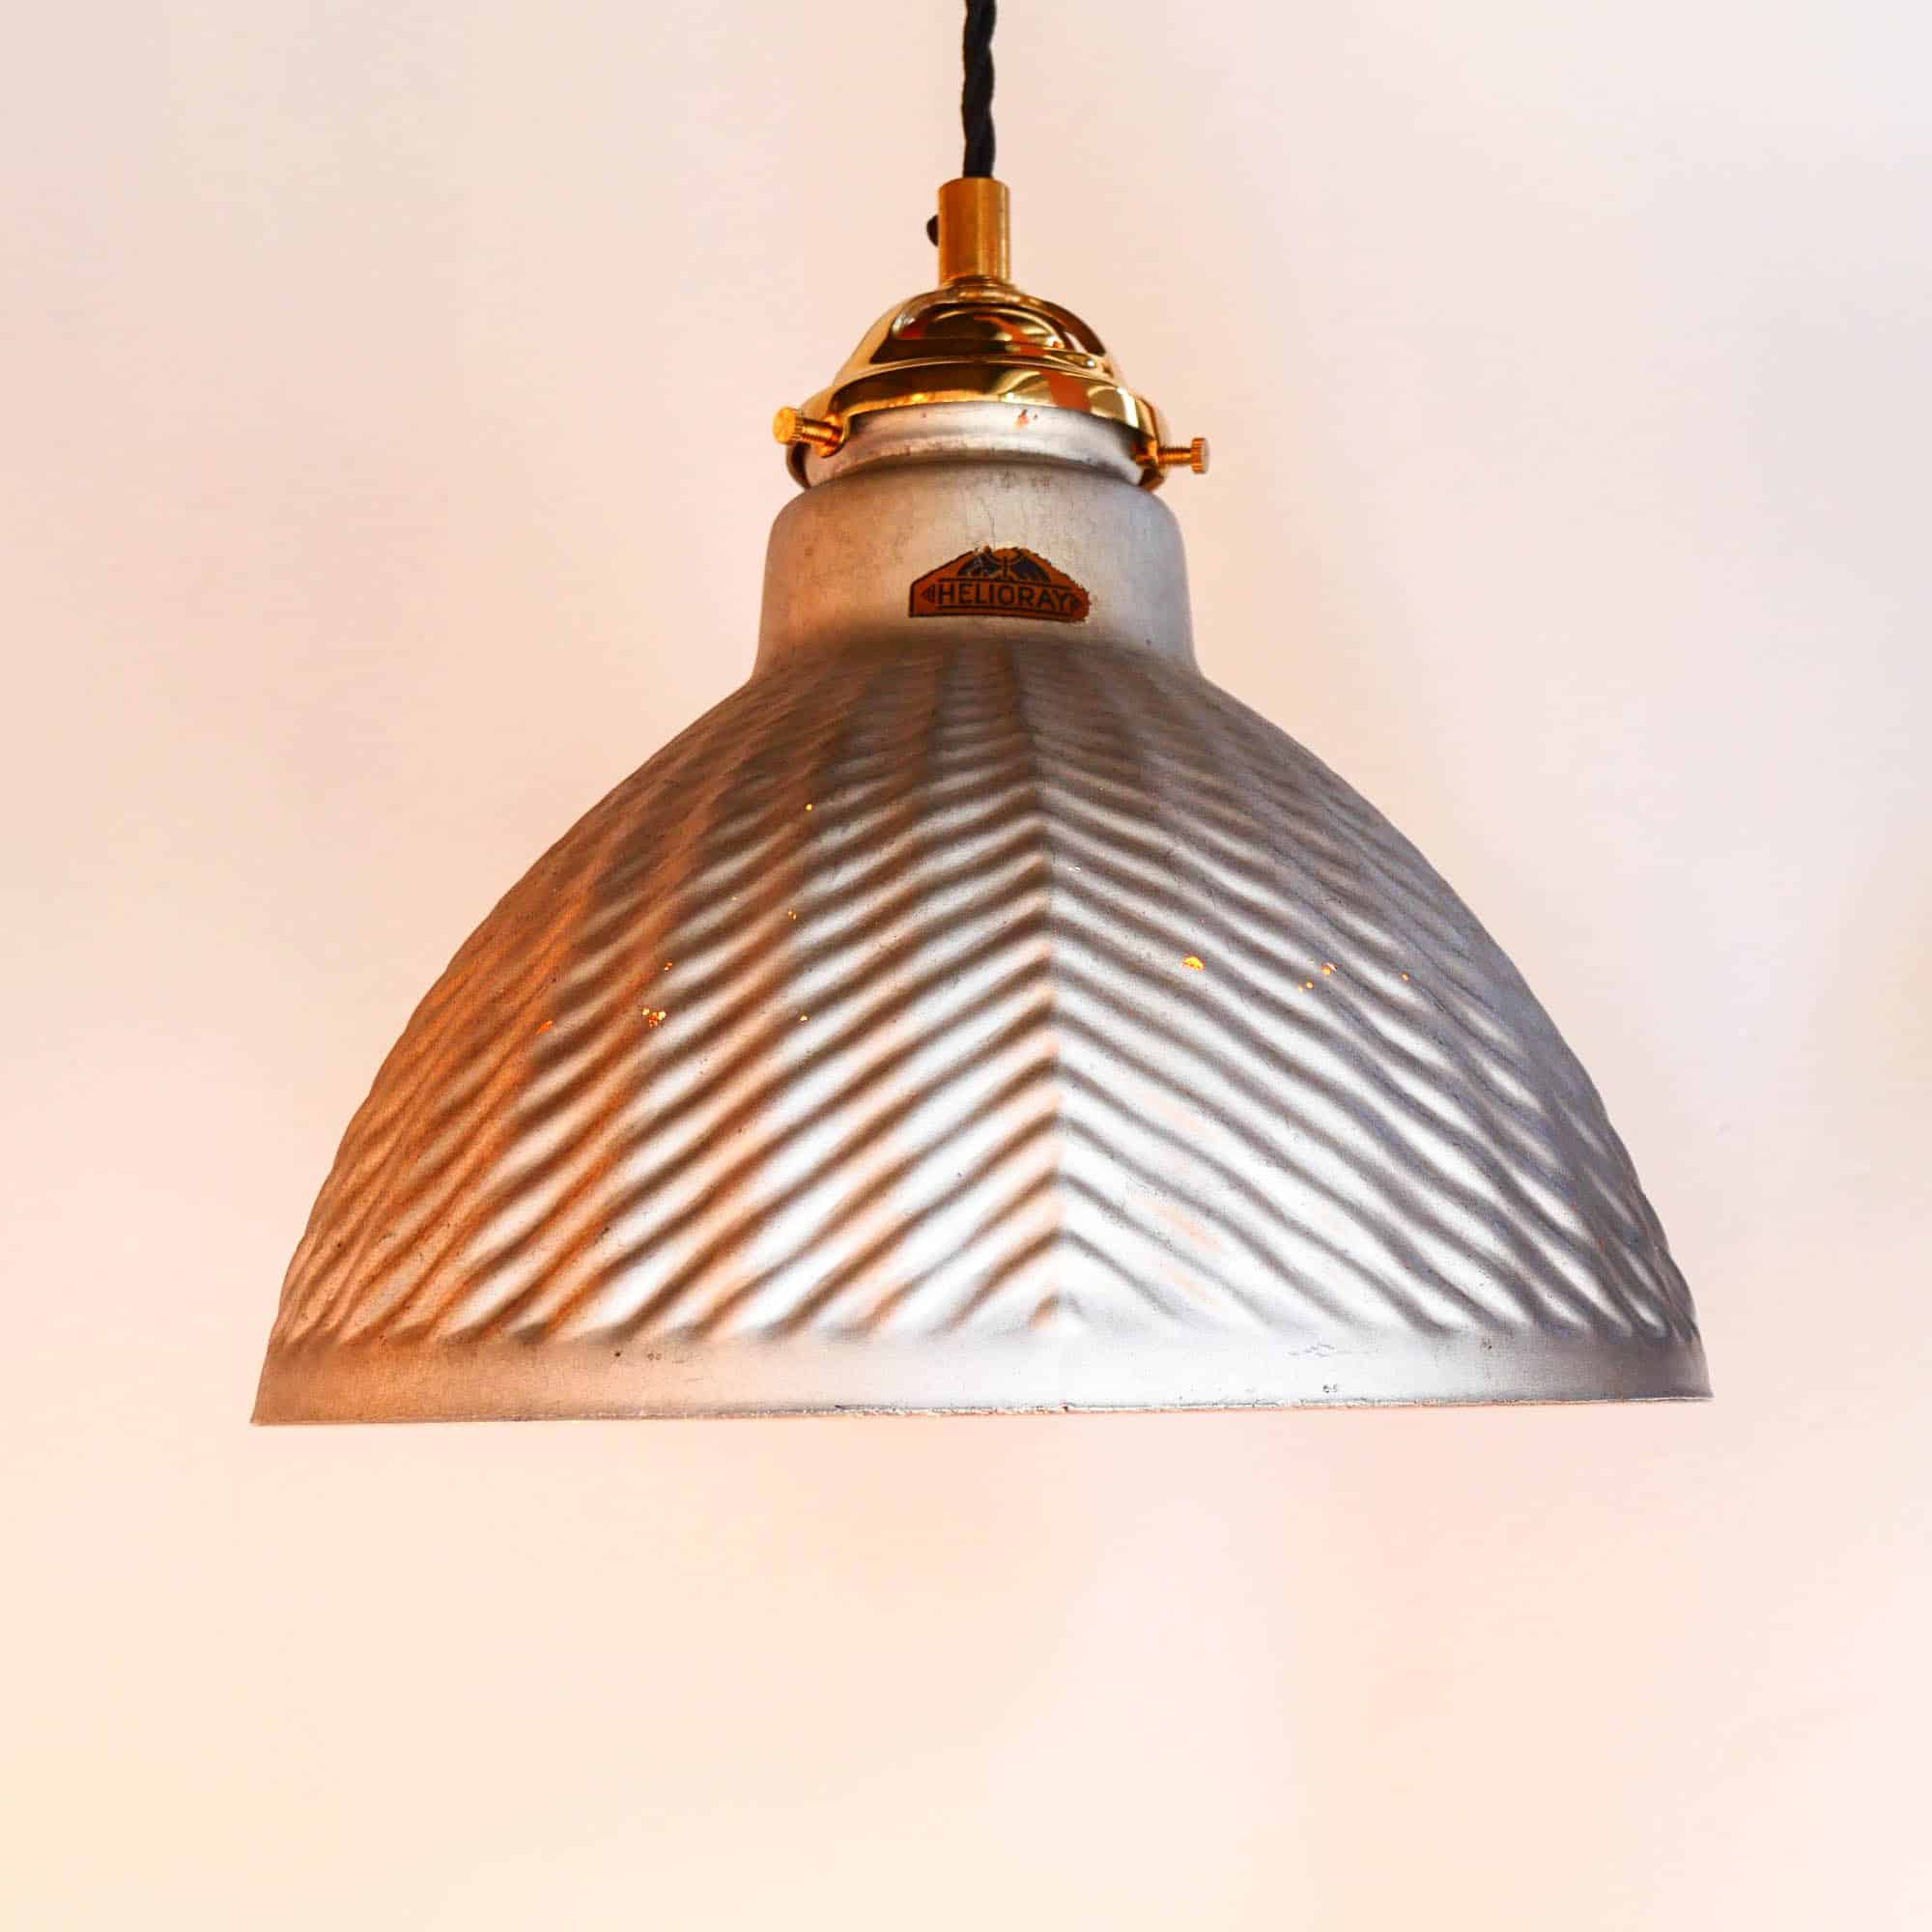 Old eglomized glass lampshade mounted in suspension – V3 - Helioray anciellitude